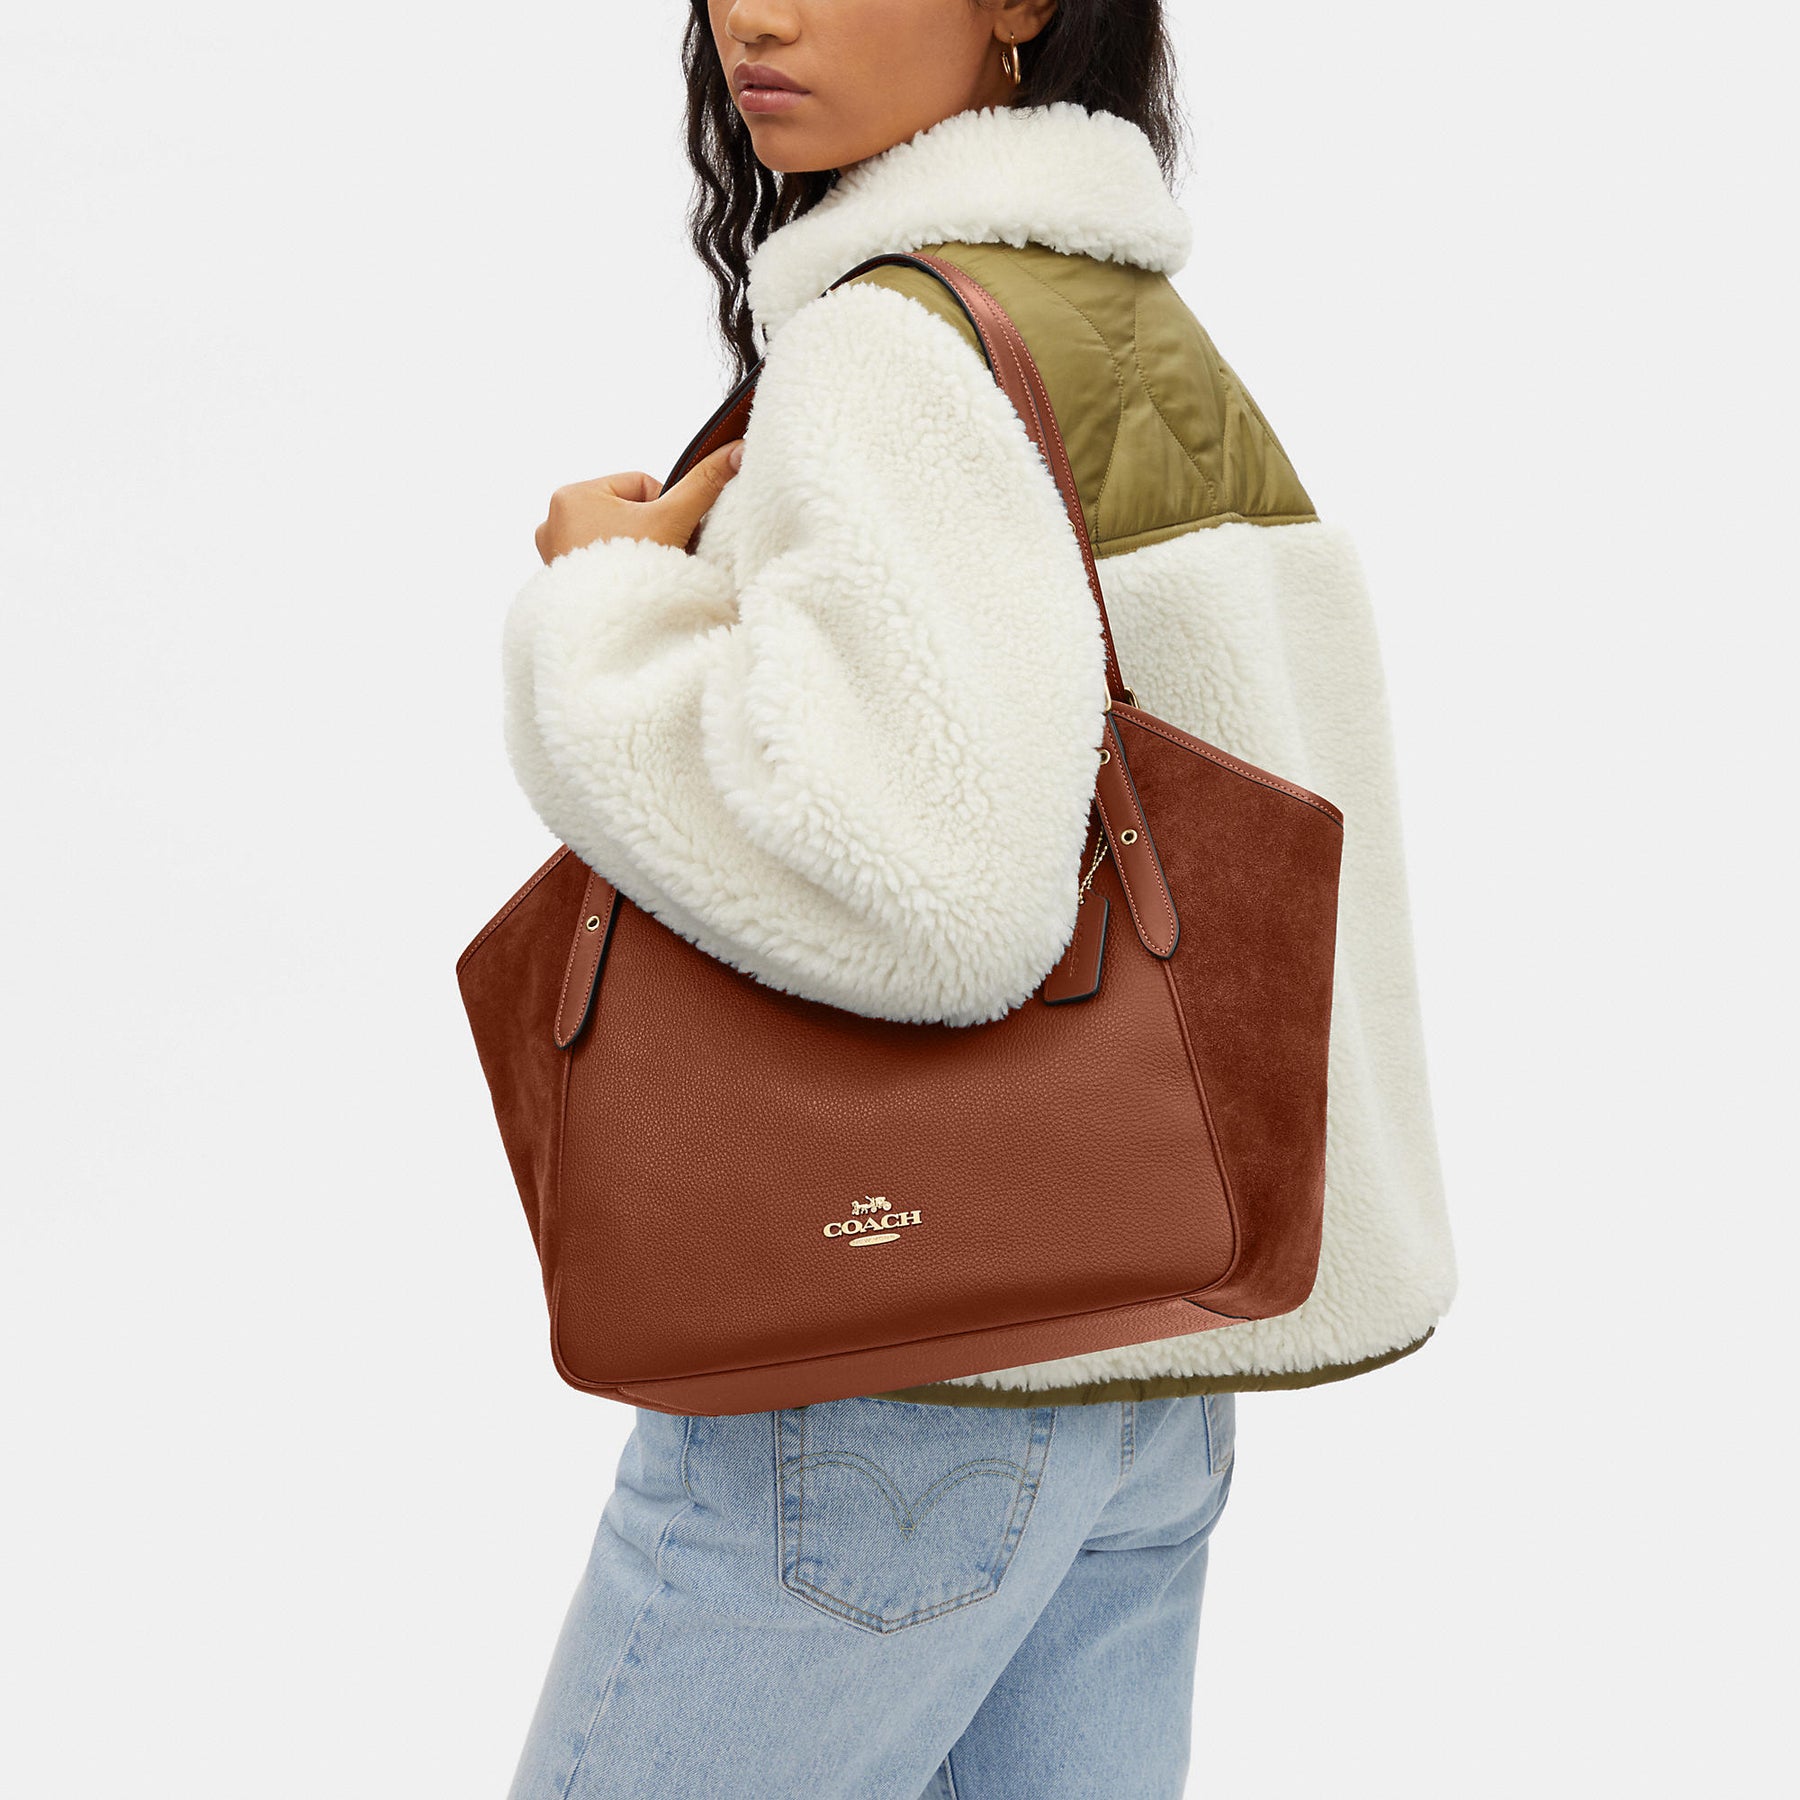 Coach Outlet Meadow Shoulder Bag in Signature Canvas - Multi